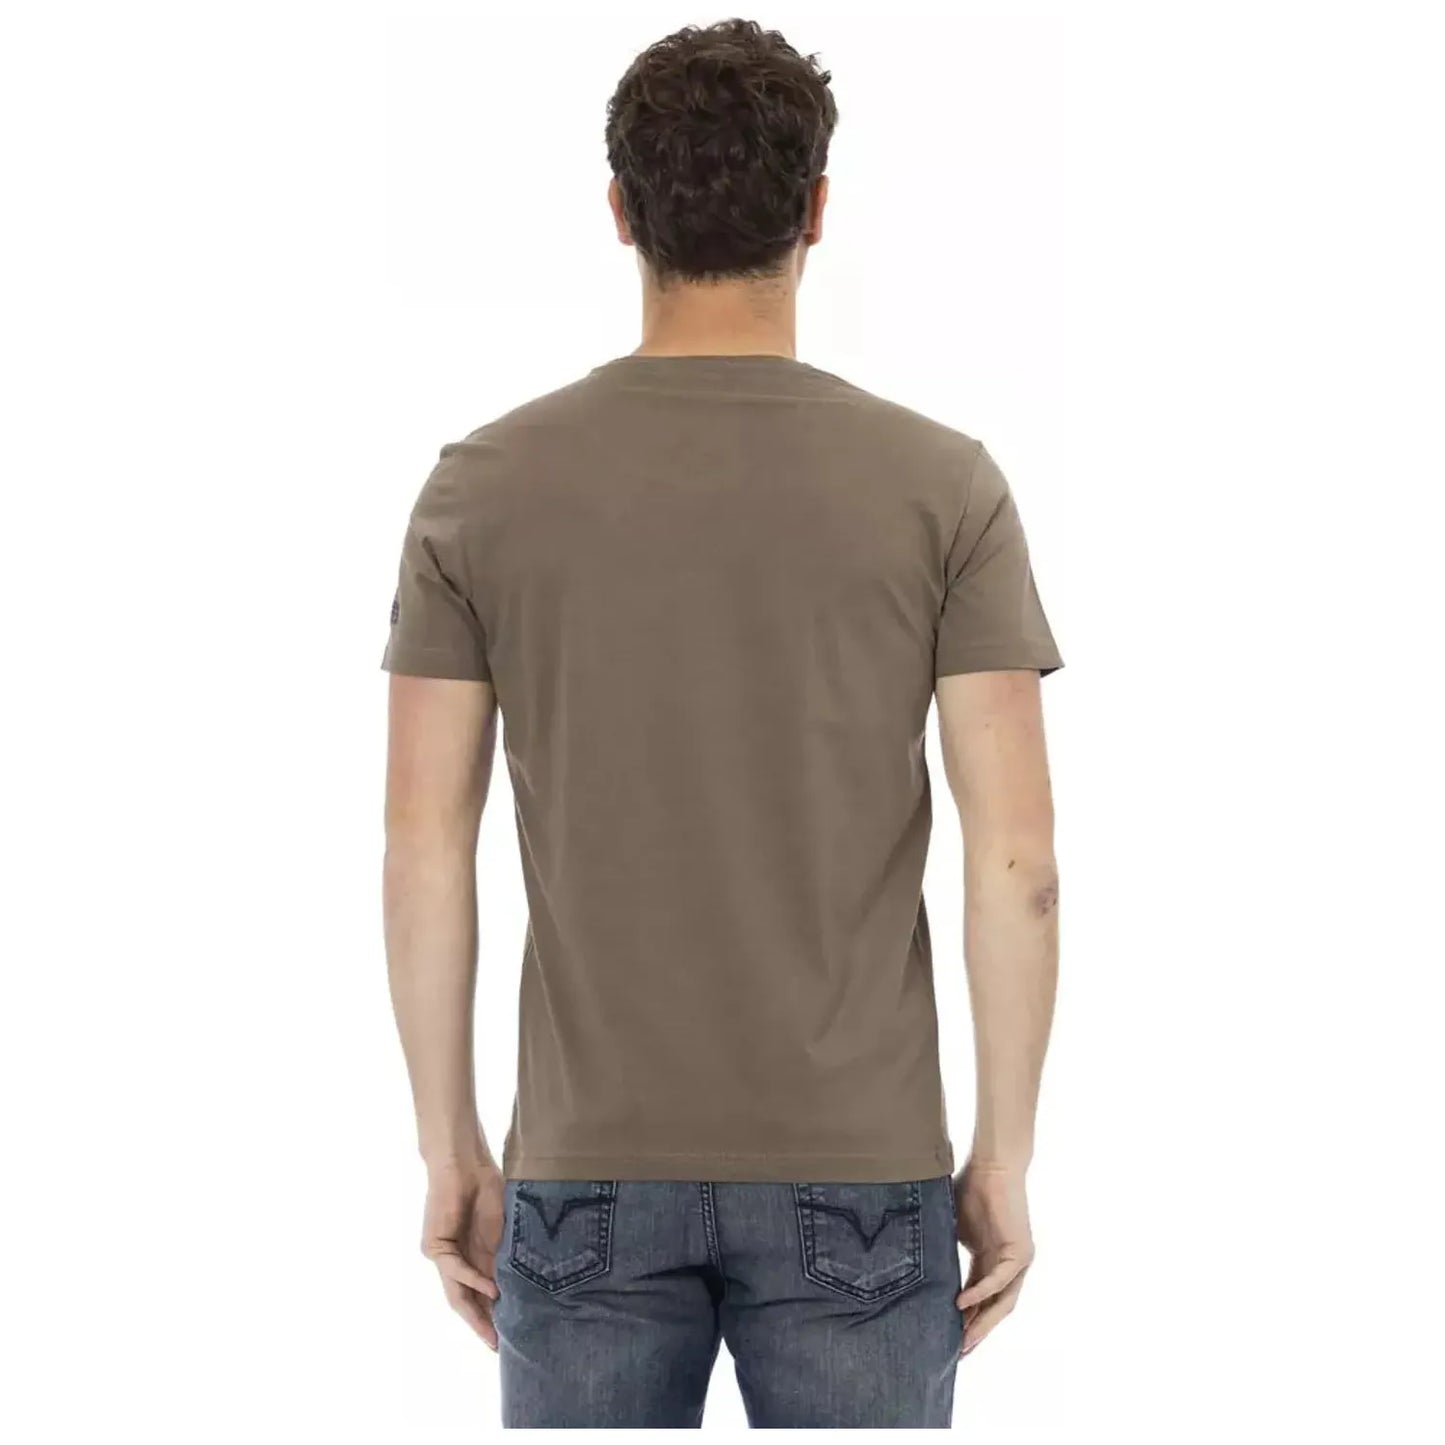 Trussardi Action Sleek Short Sleeve Tee with Unique Front Print brown-cotton-t-shirt-4